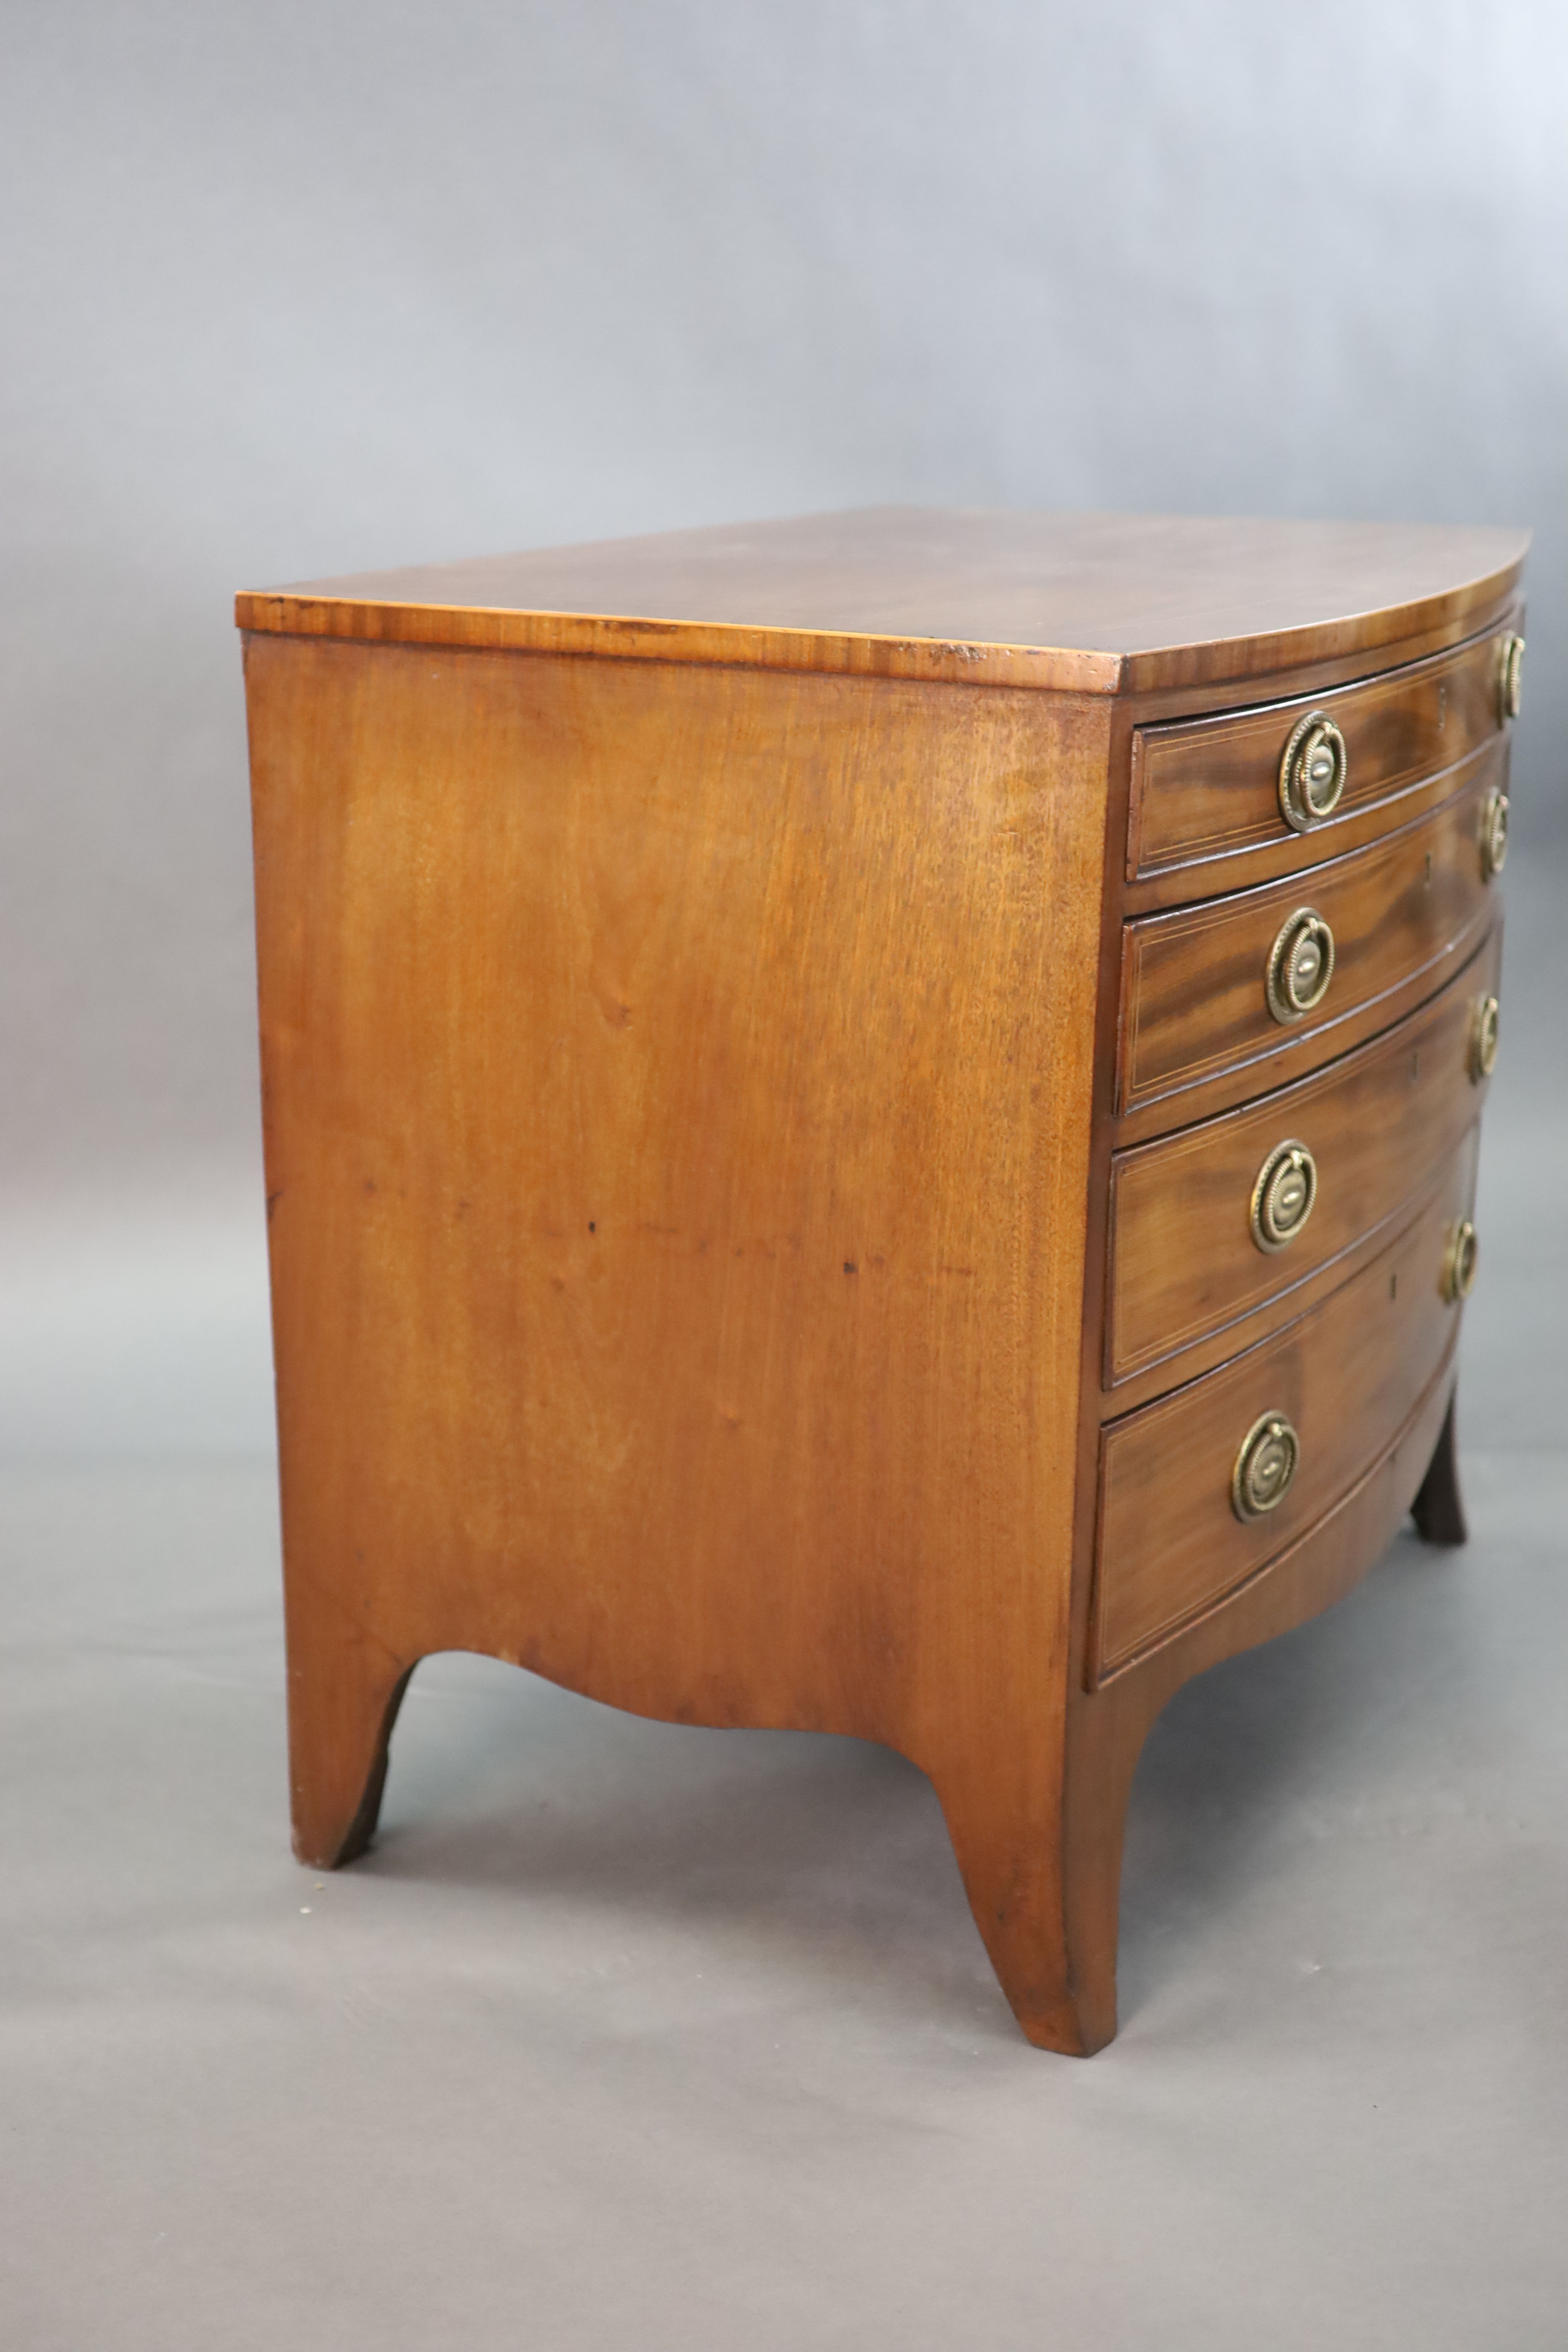 A Regency crossbanded mahogany bowfront chest, W.2ft 10in. D.1ft 10in. H.2ft 6in.